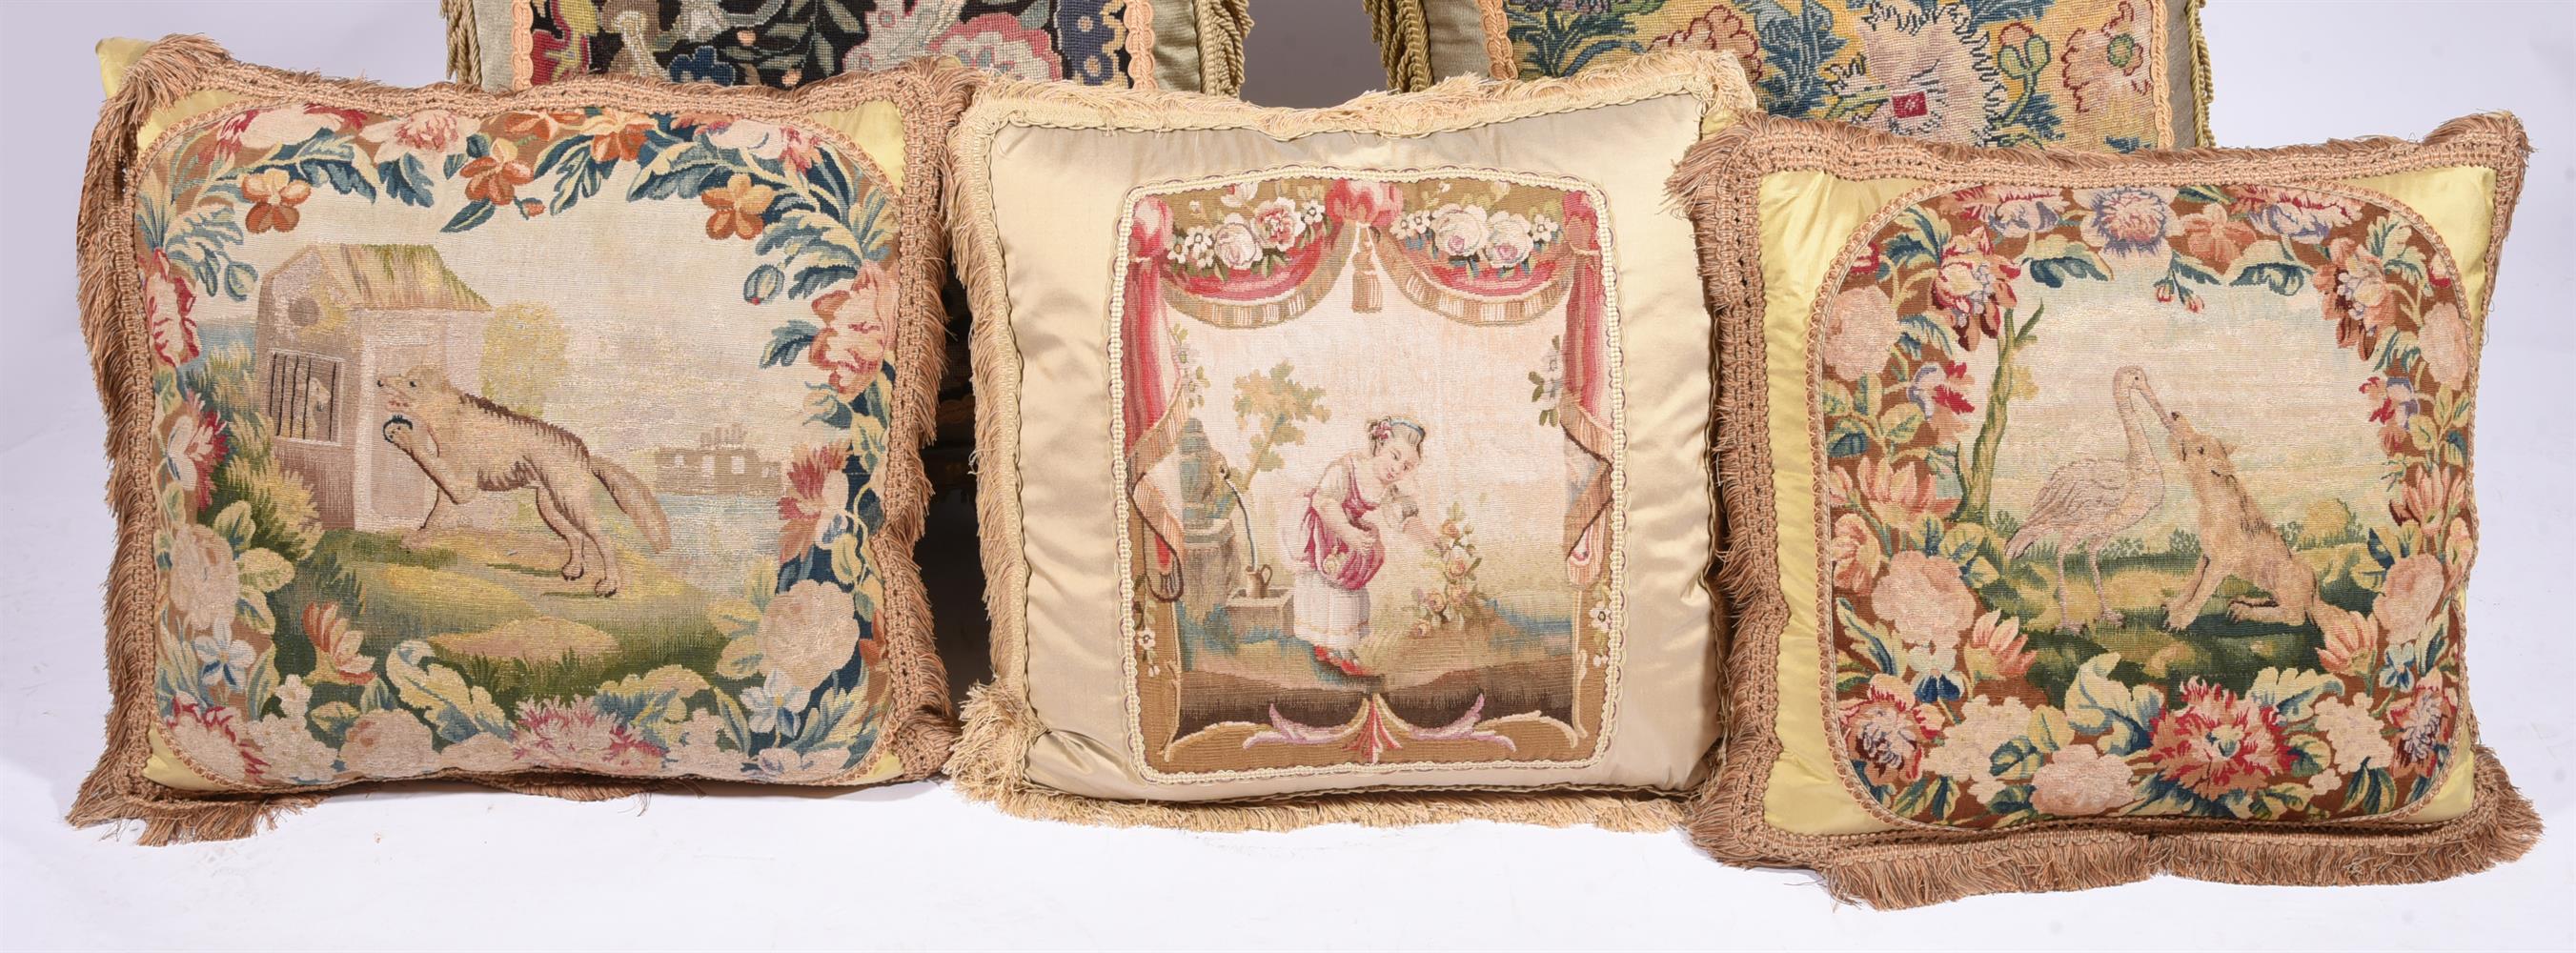 SEVEN LARGE CUSHIONS INCORPORATING 18TH CENTURY WOOLWORK AND LATER FABRIC - Image 3 of 4